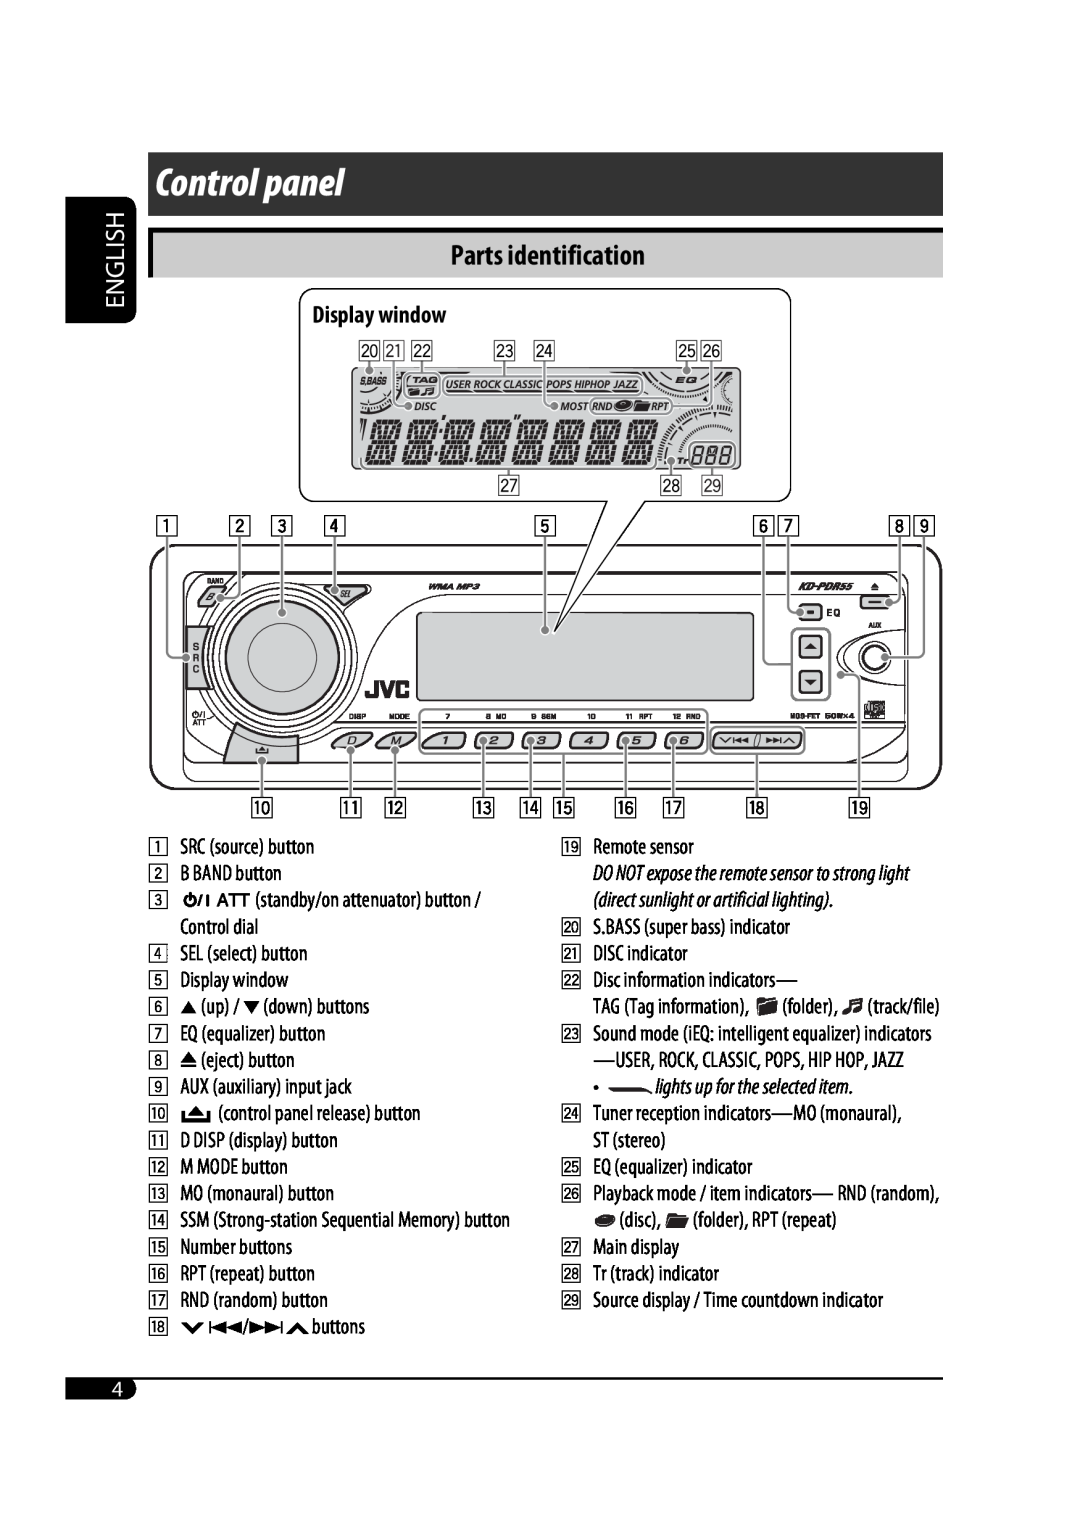 JVC GET0425-001A manual Control panel, Parts identification, English, Display window, lights up for the selected item 